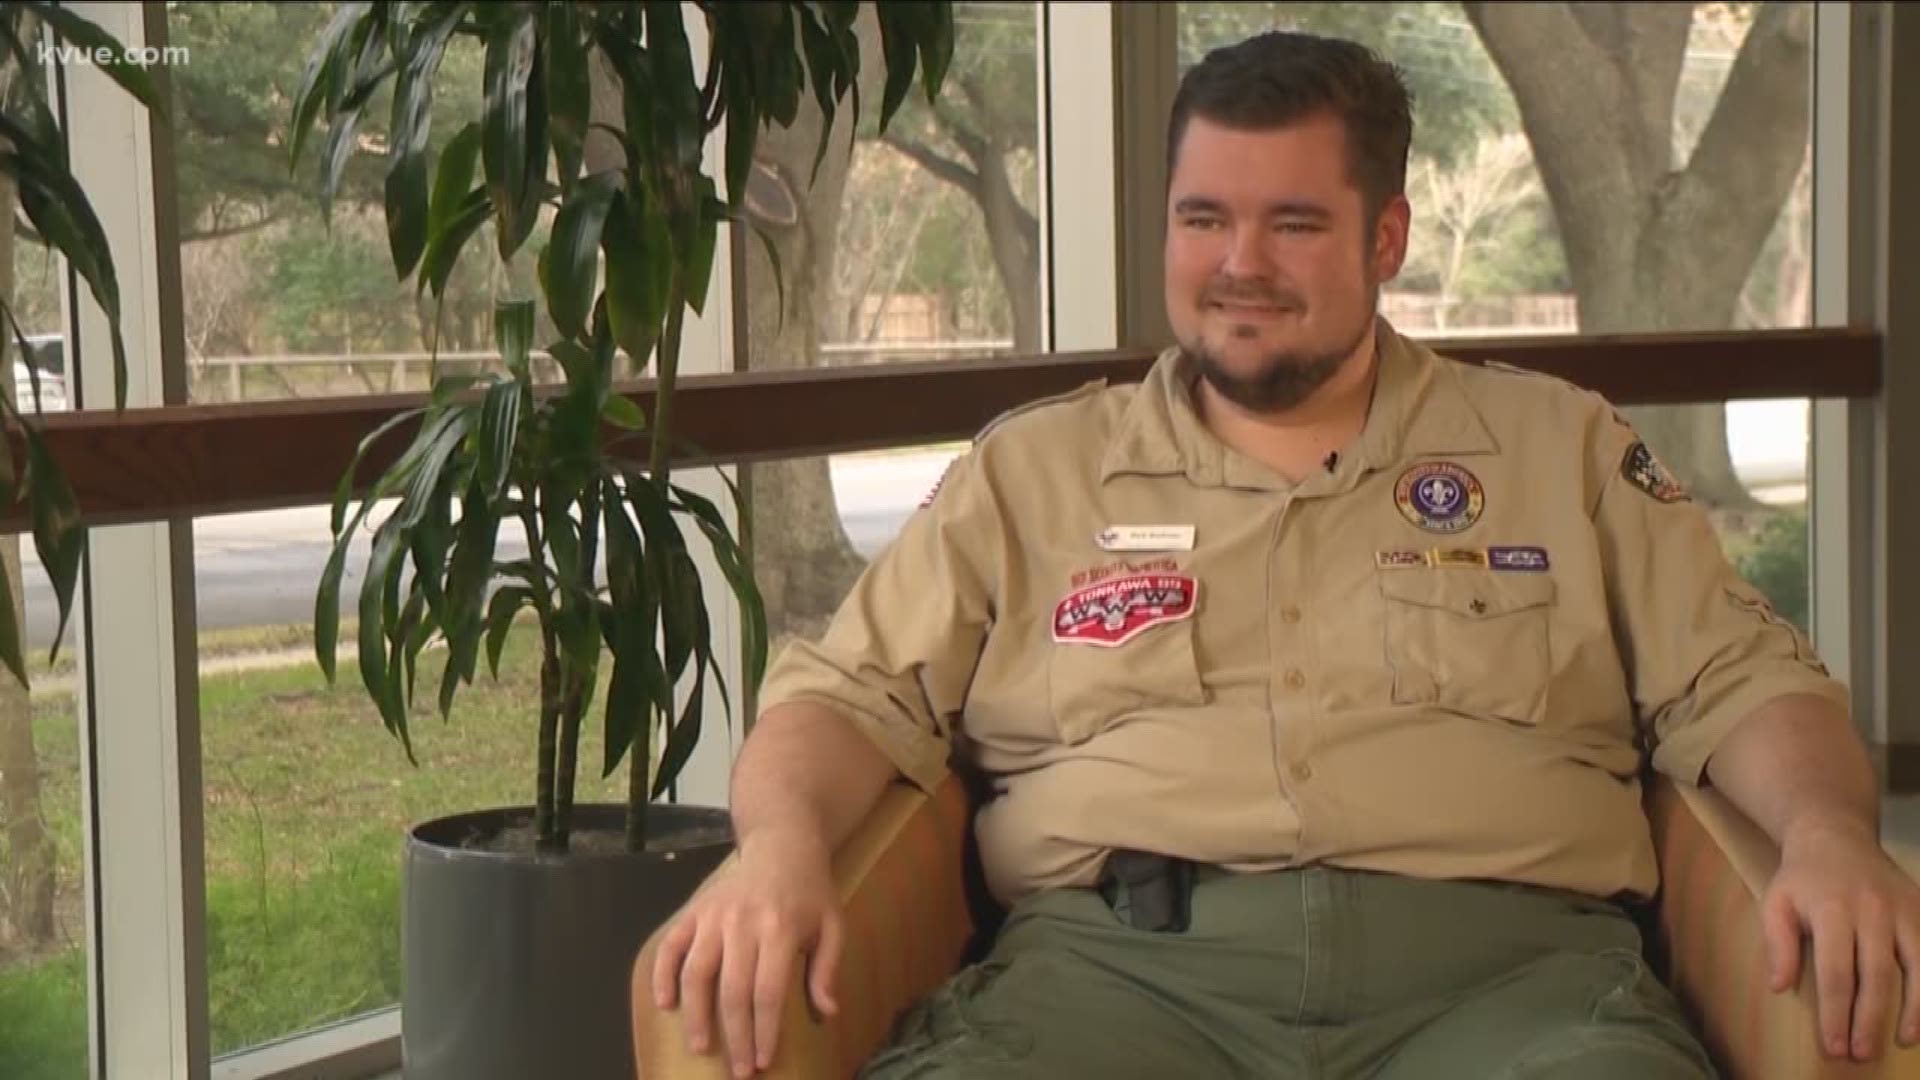 Chris Workman beat the odds to become an Eagle Scout.